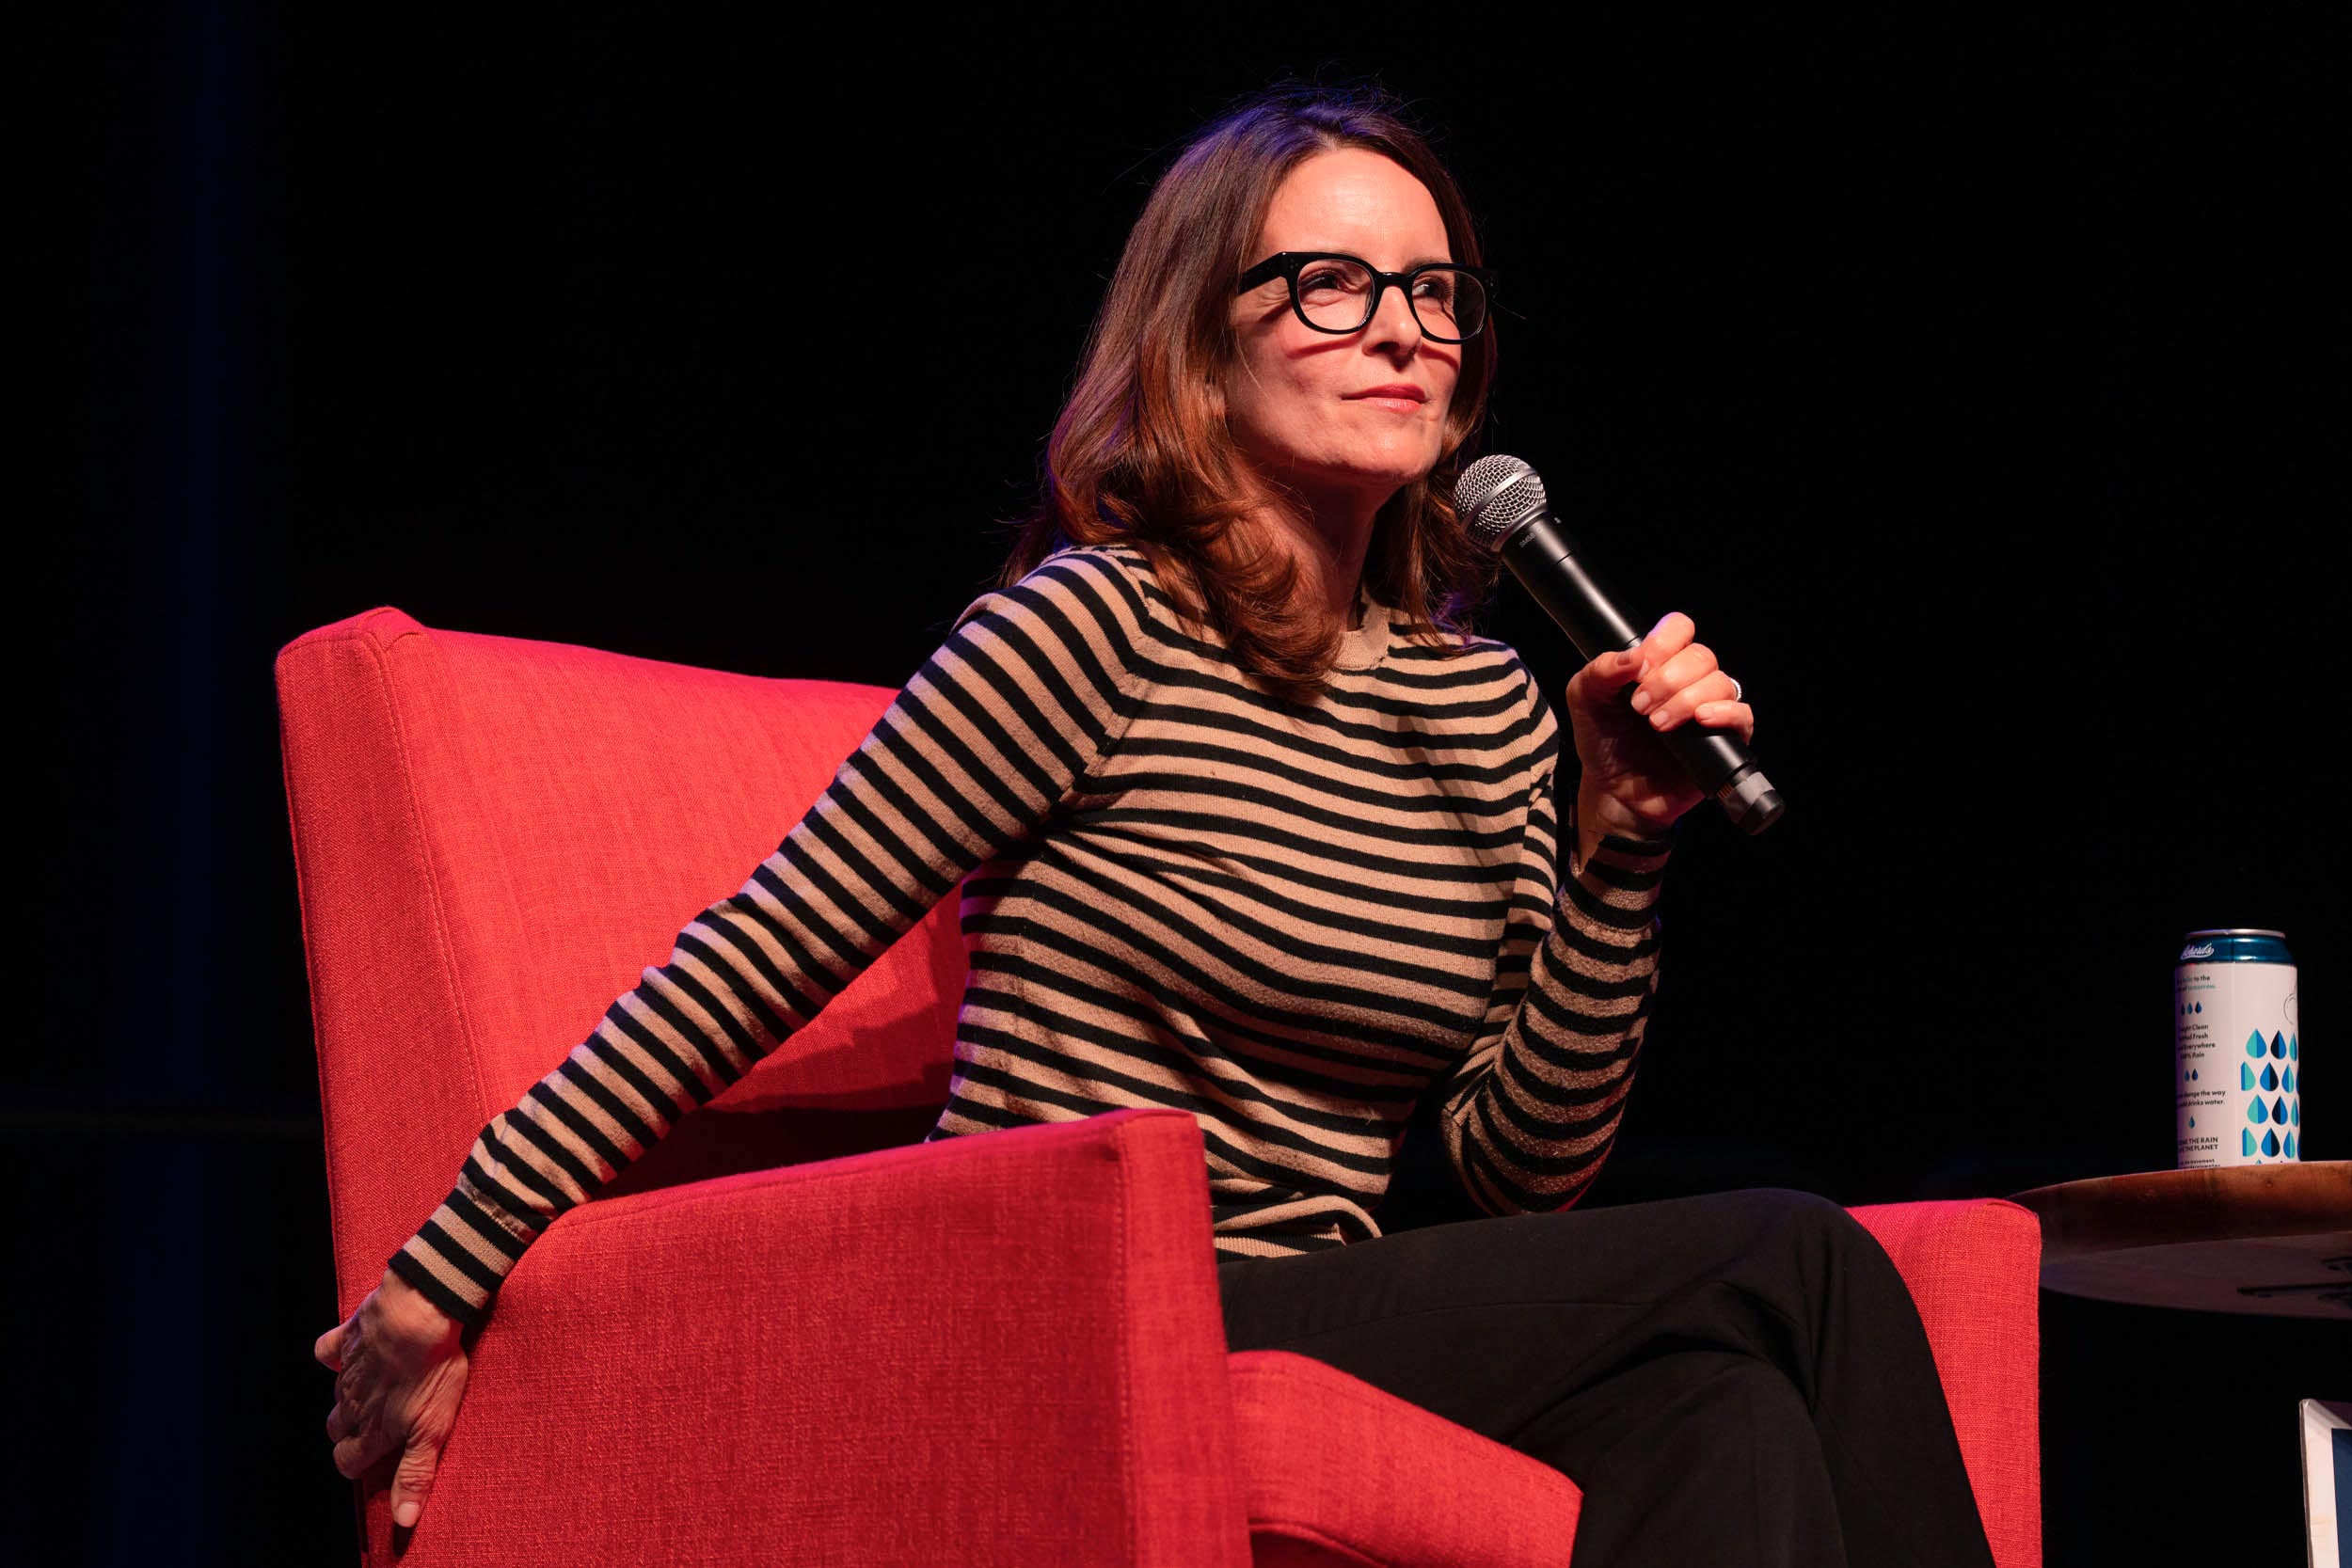 an image of Tina Fey sitting in a red chair